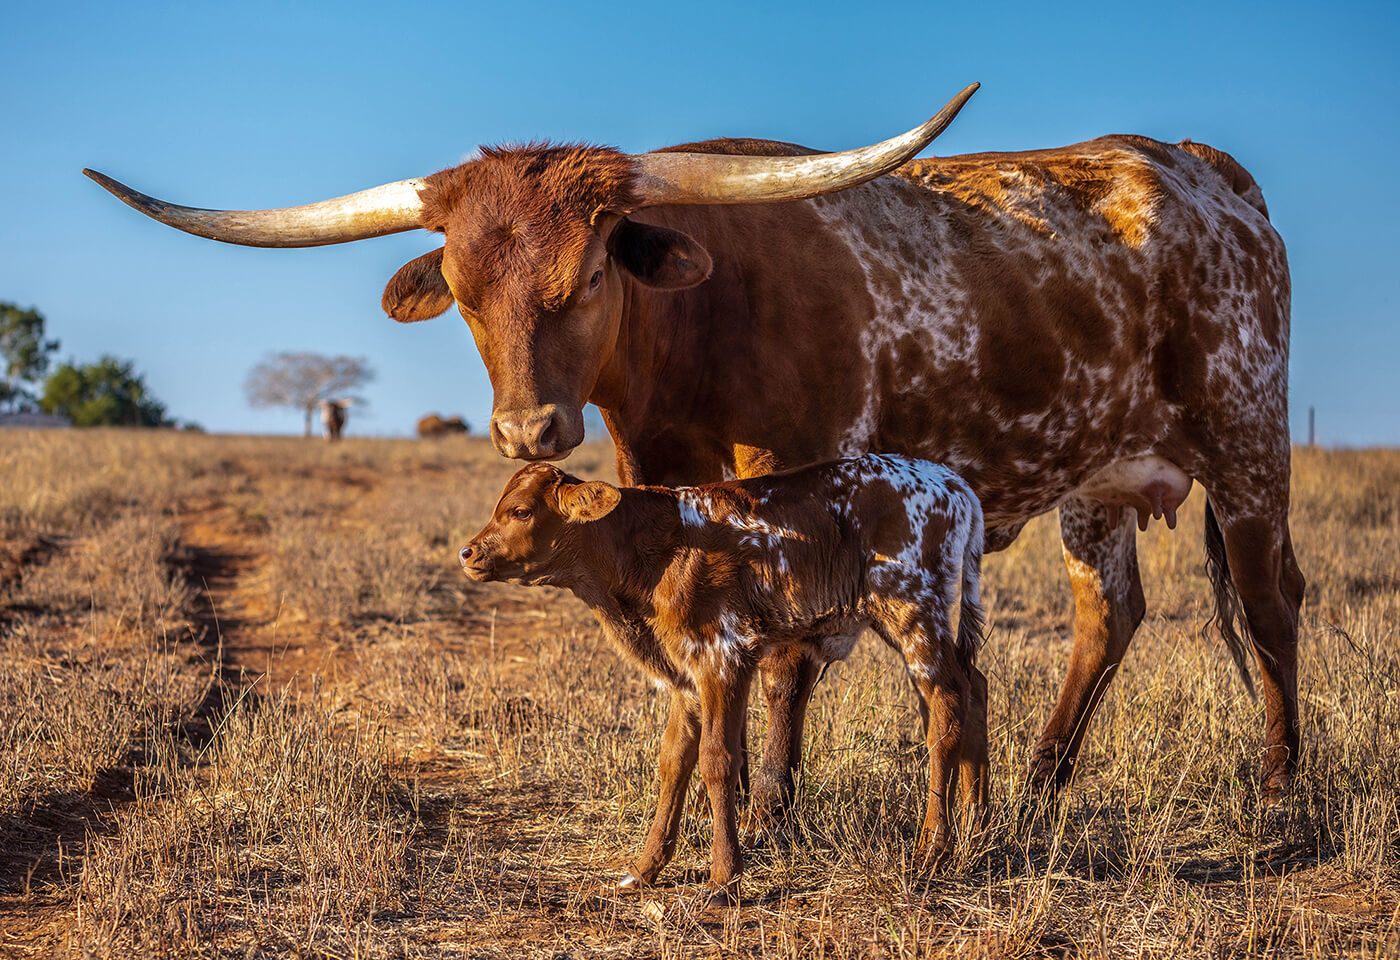 Image of a cattle and its calf by Jay Collier